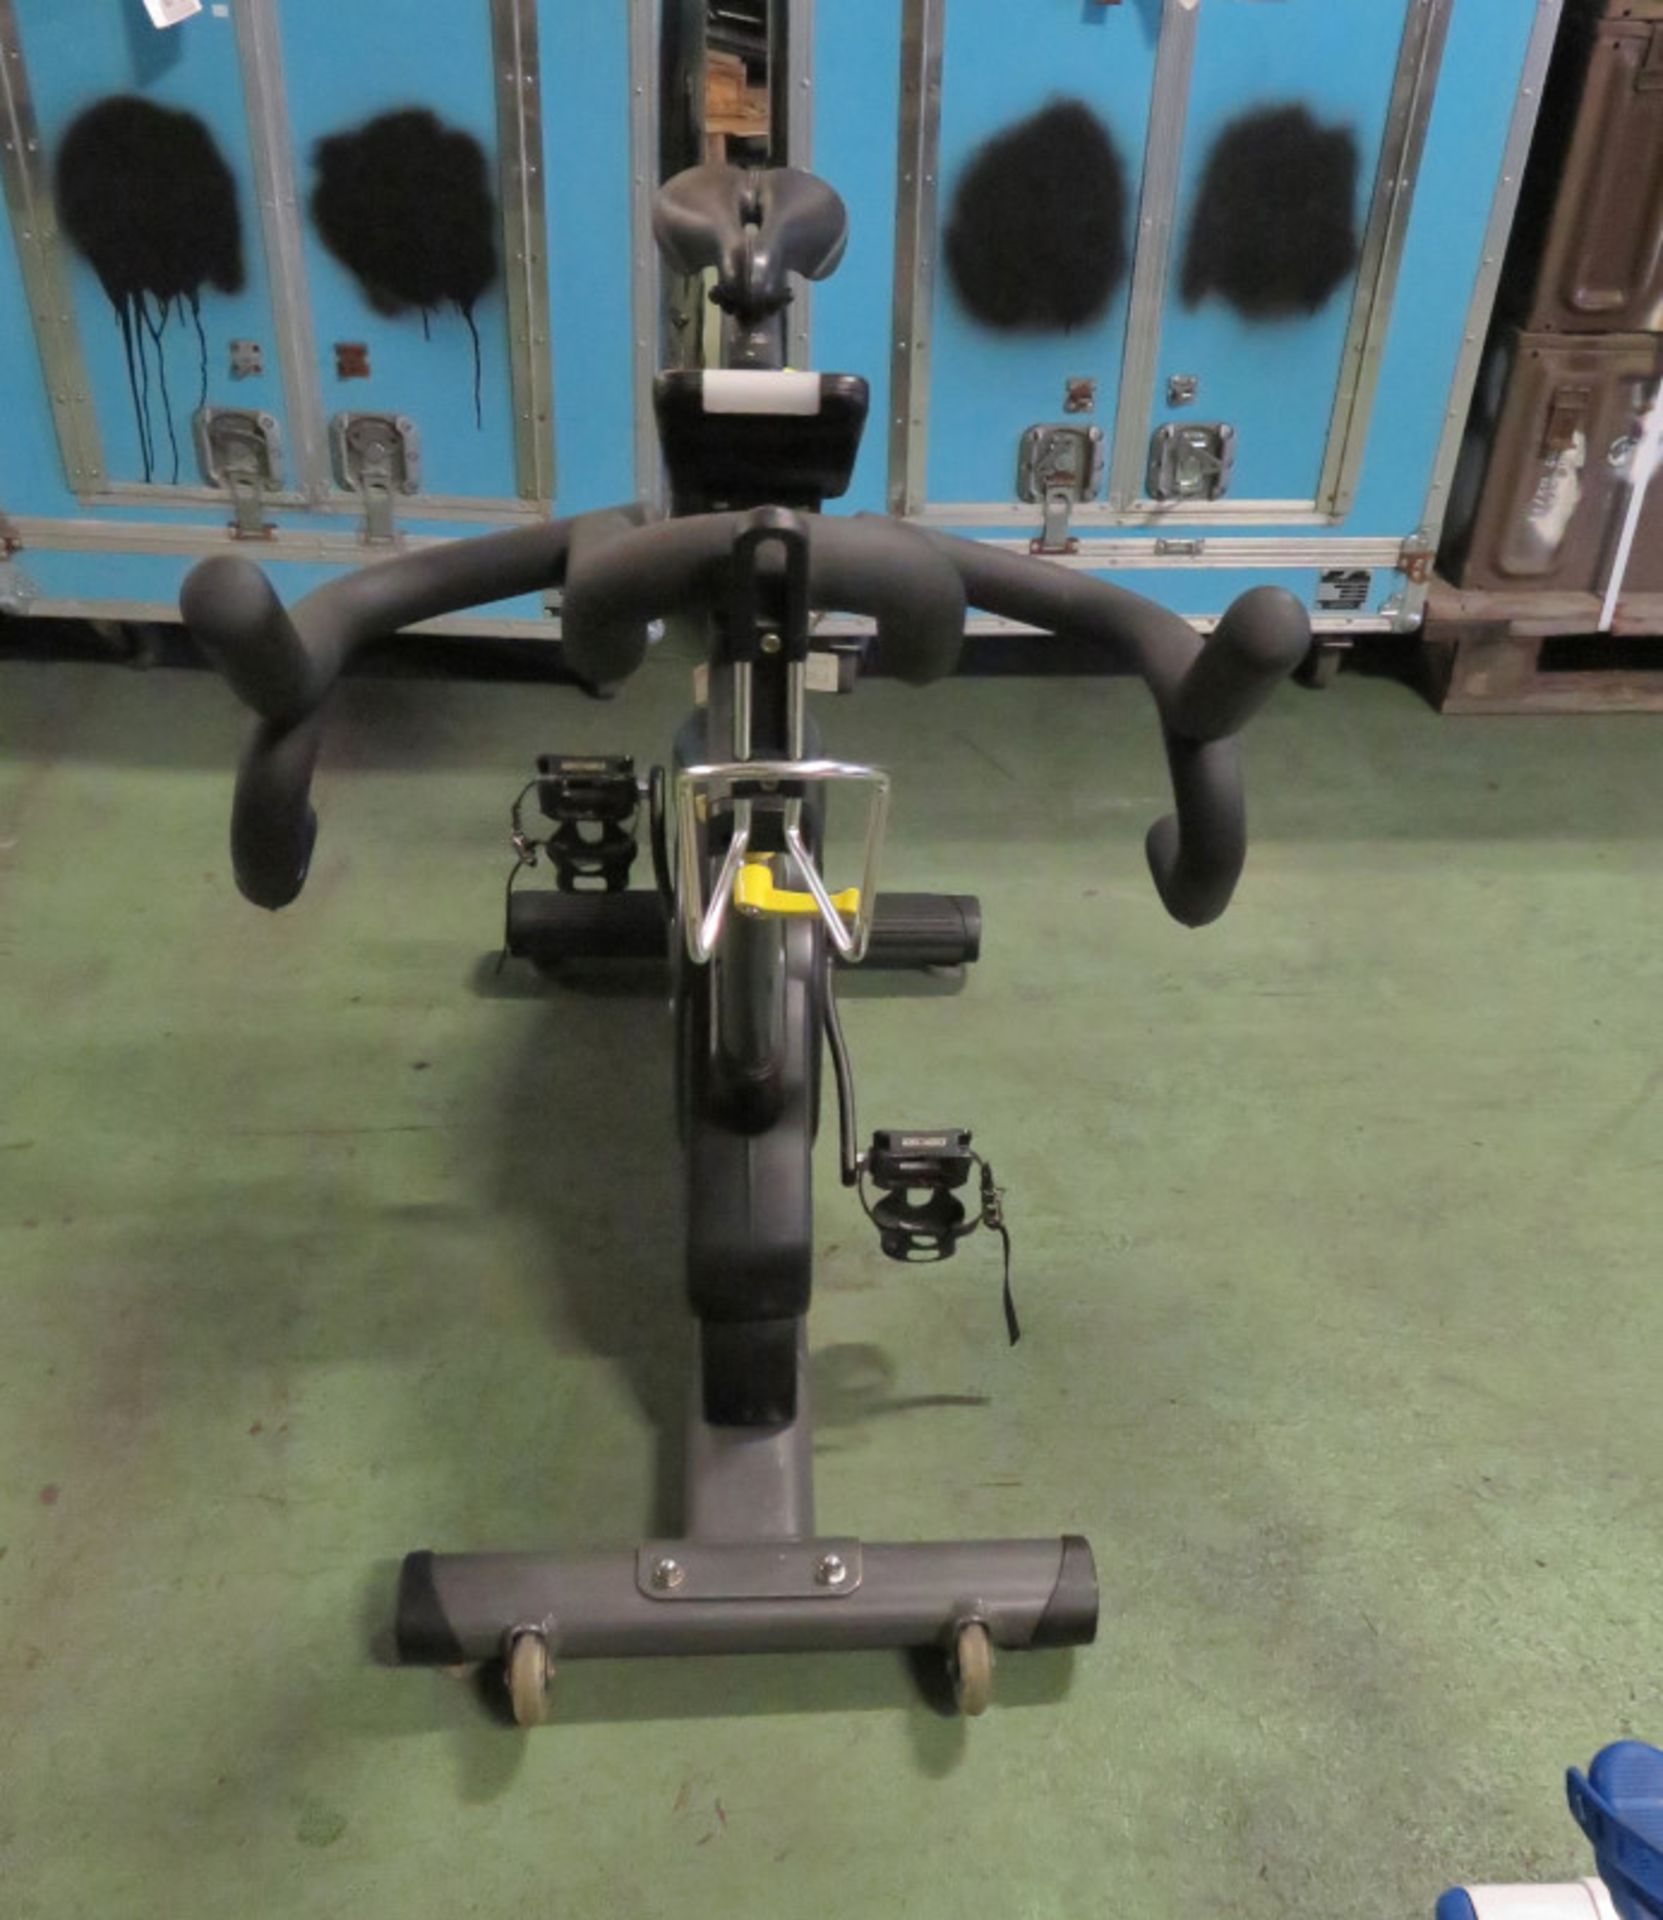 SportsArt C530 Exercise Bike with display module - Powers on but fundctions not tested - Image 4 of 4